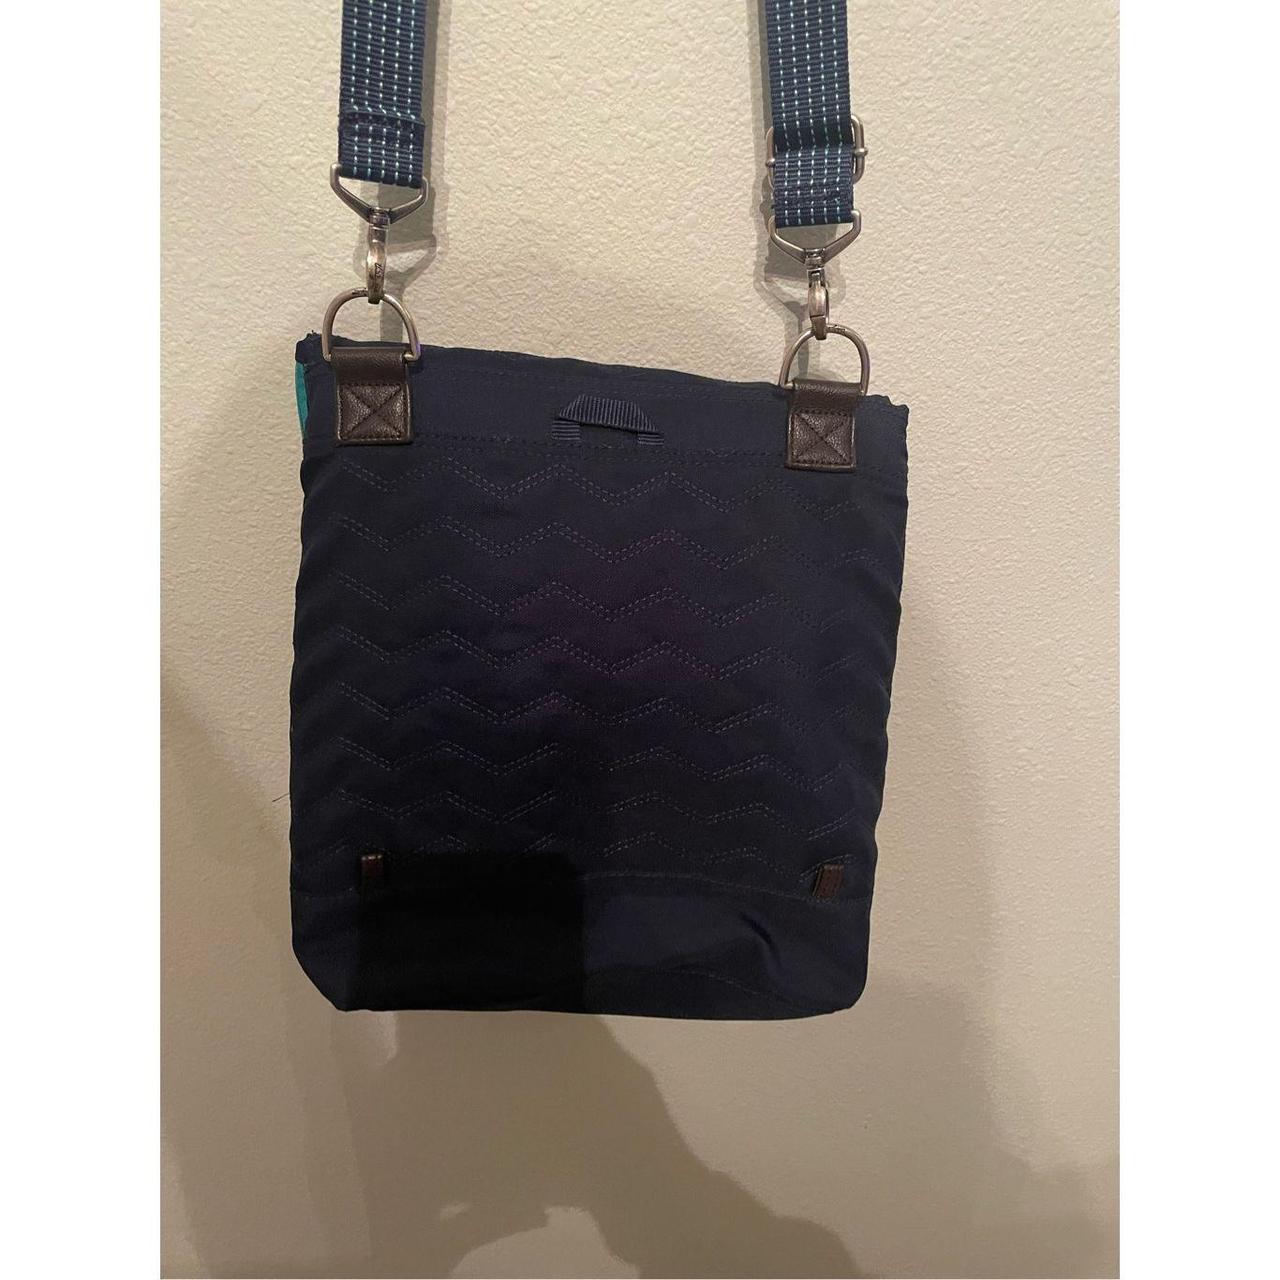 Black purse! Jewel by Thirty One. Literally the - Depop